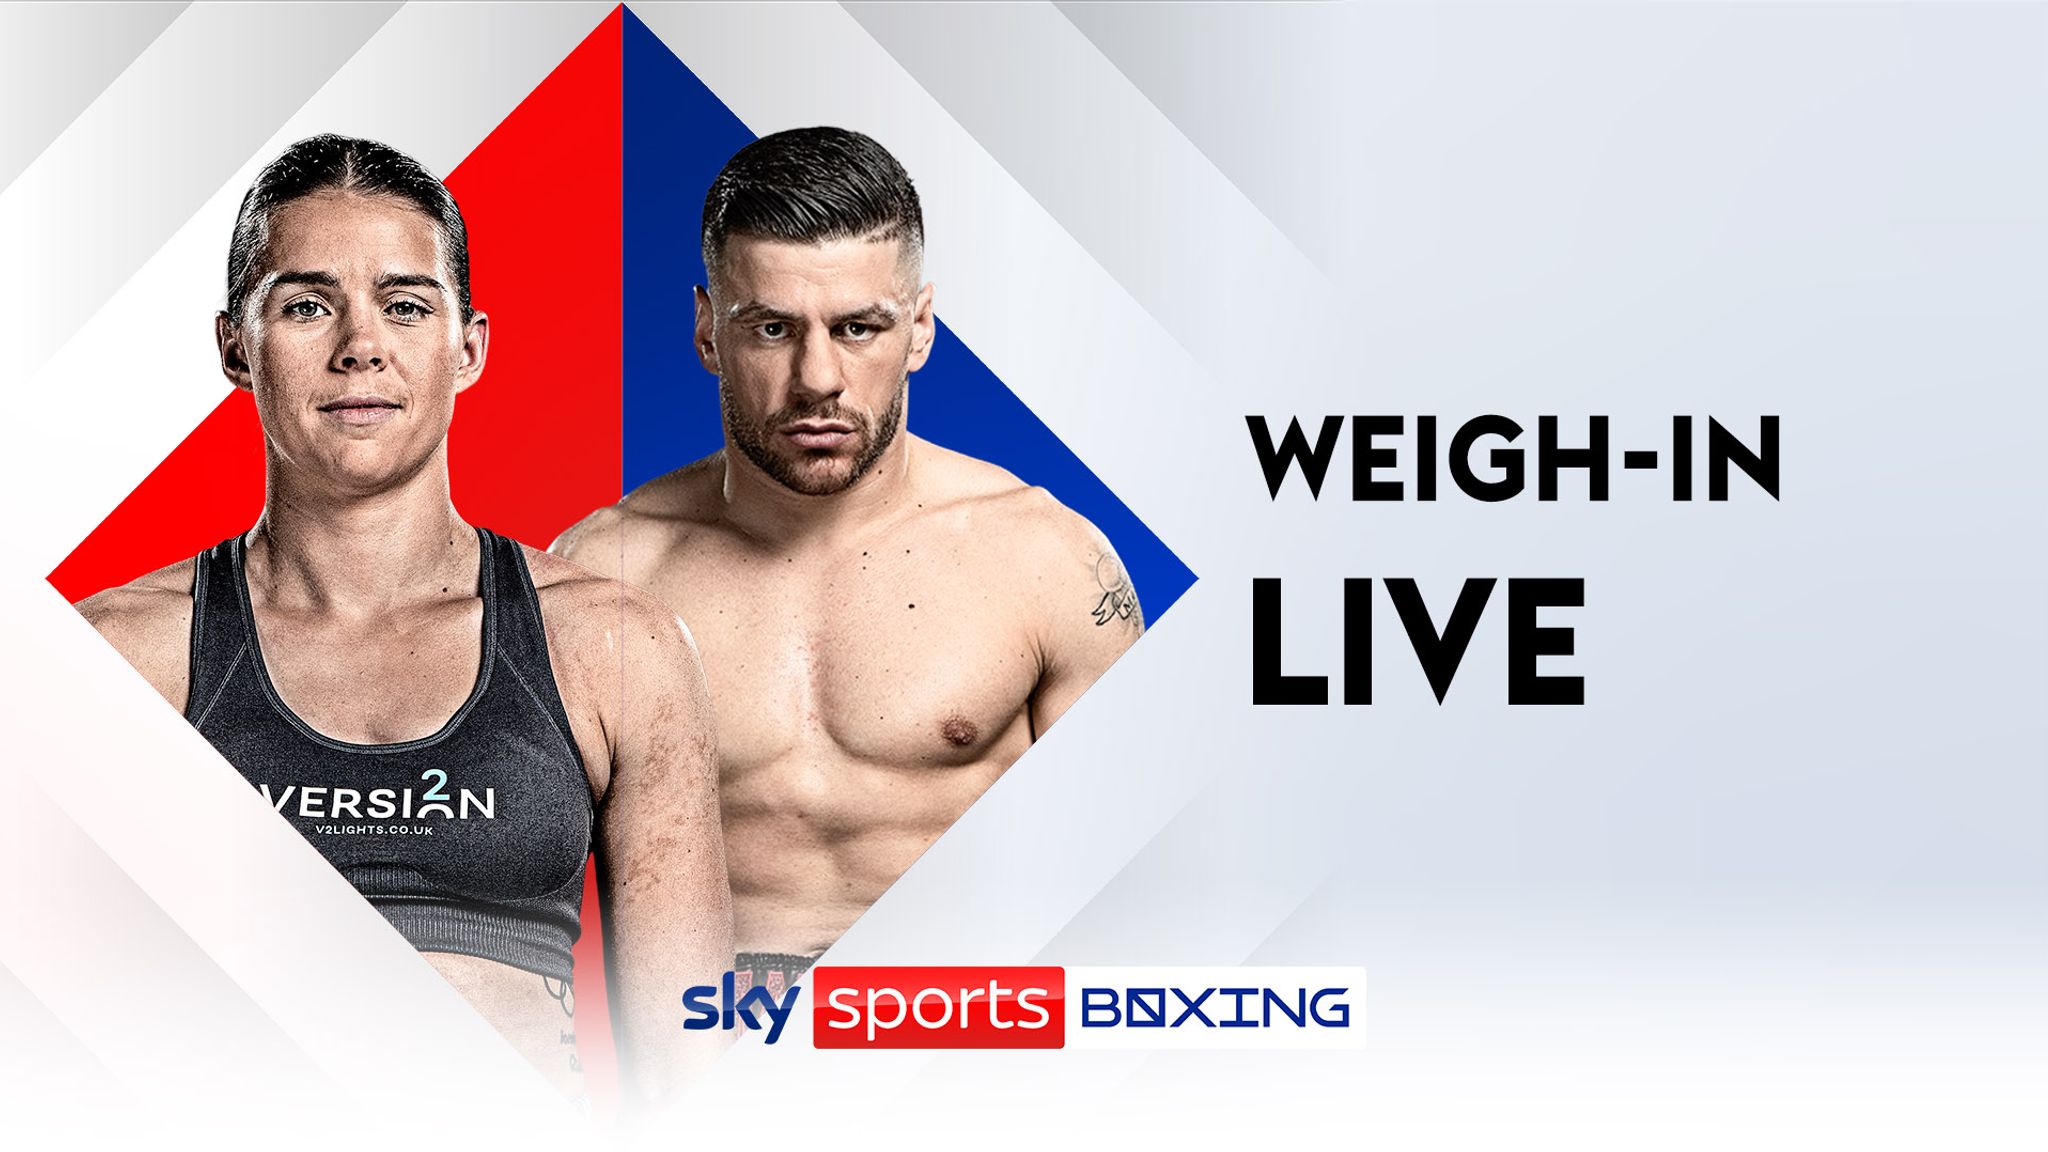 Savannah Marshall vs Femke Hermans Watch free live stream of weigh-in featuring Florian Marku Boxing News Sky Sports